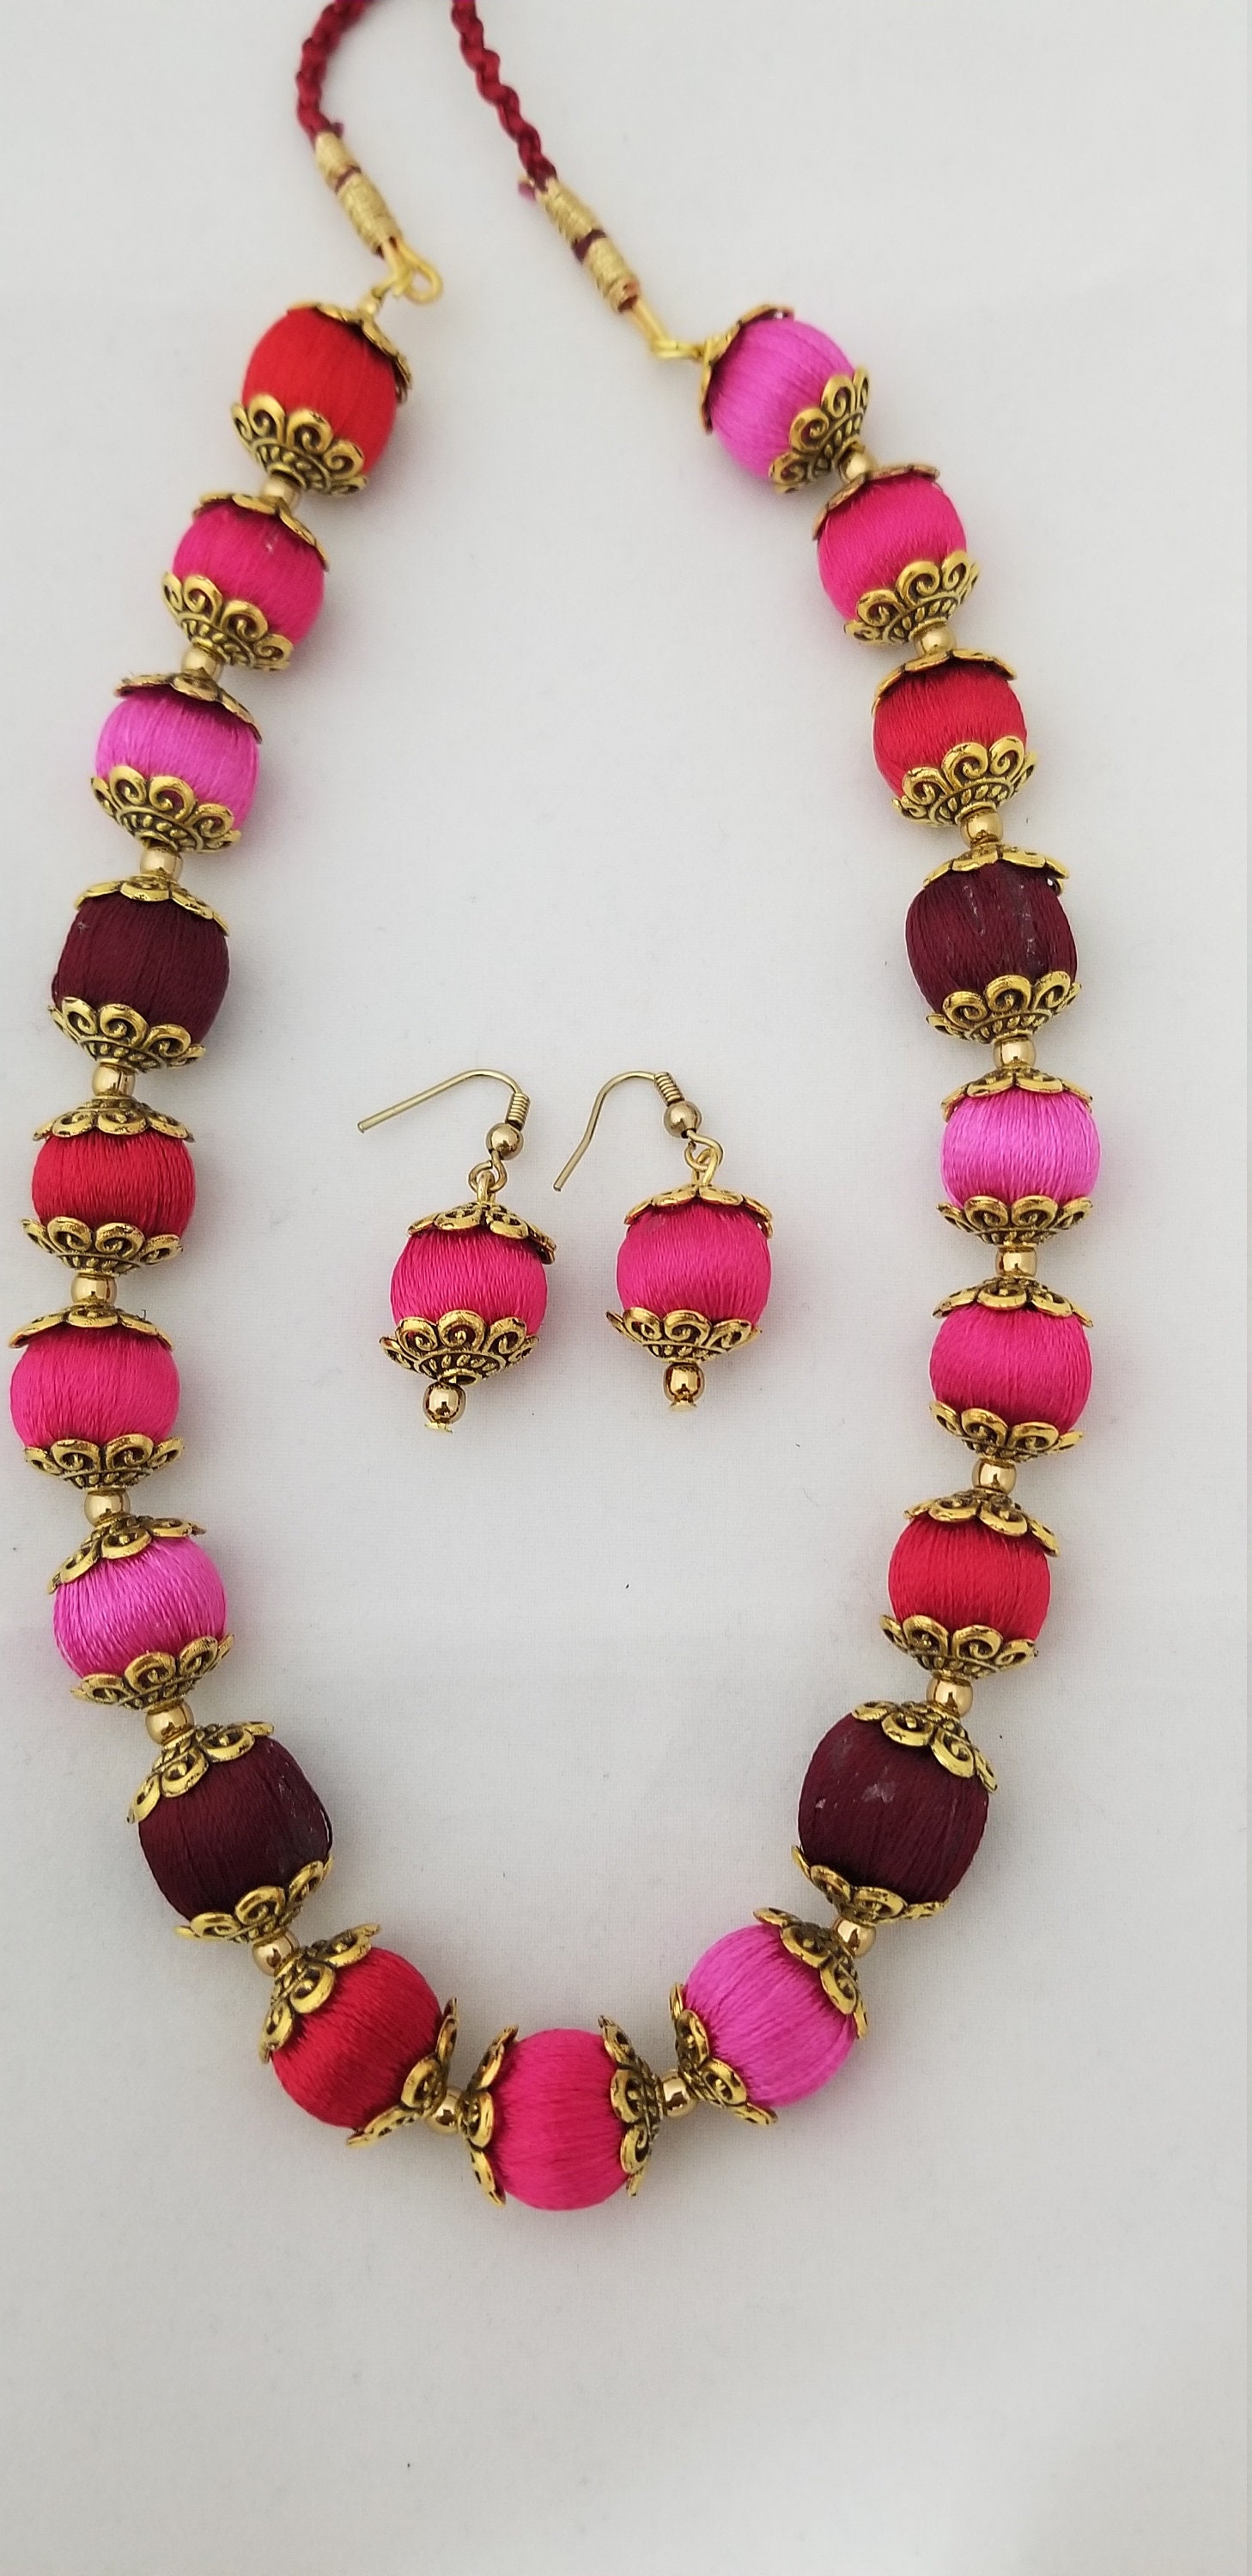 Ethnic Jewelry Multi-color Silk thread beads chain with matching Earrings MK Fashionkart Indian Jewelry